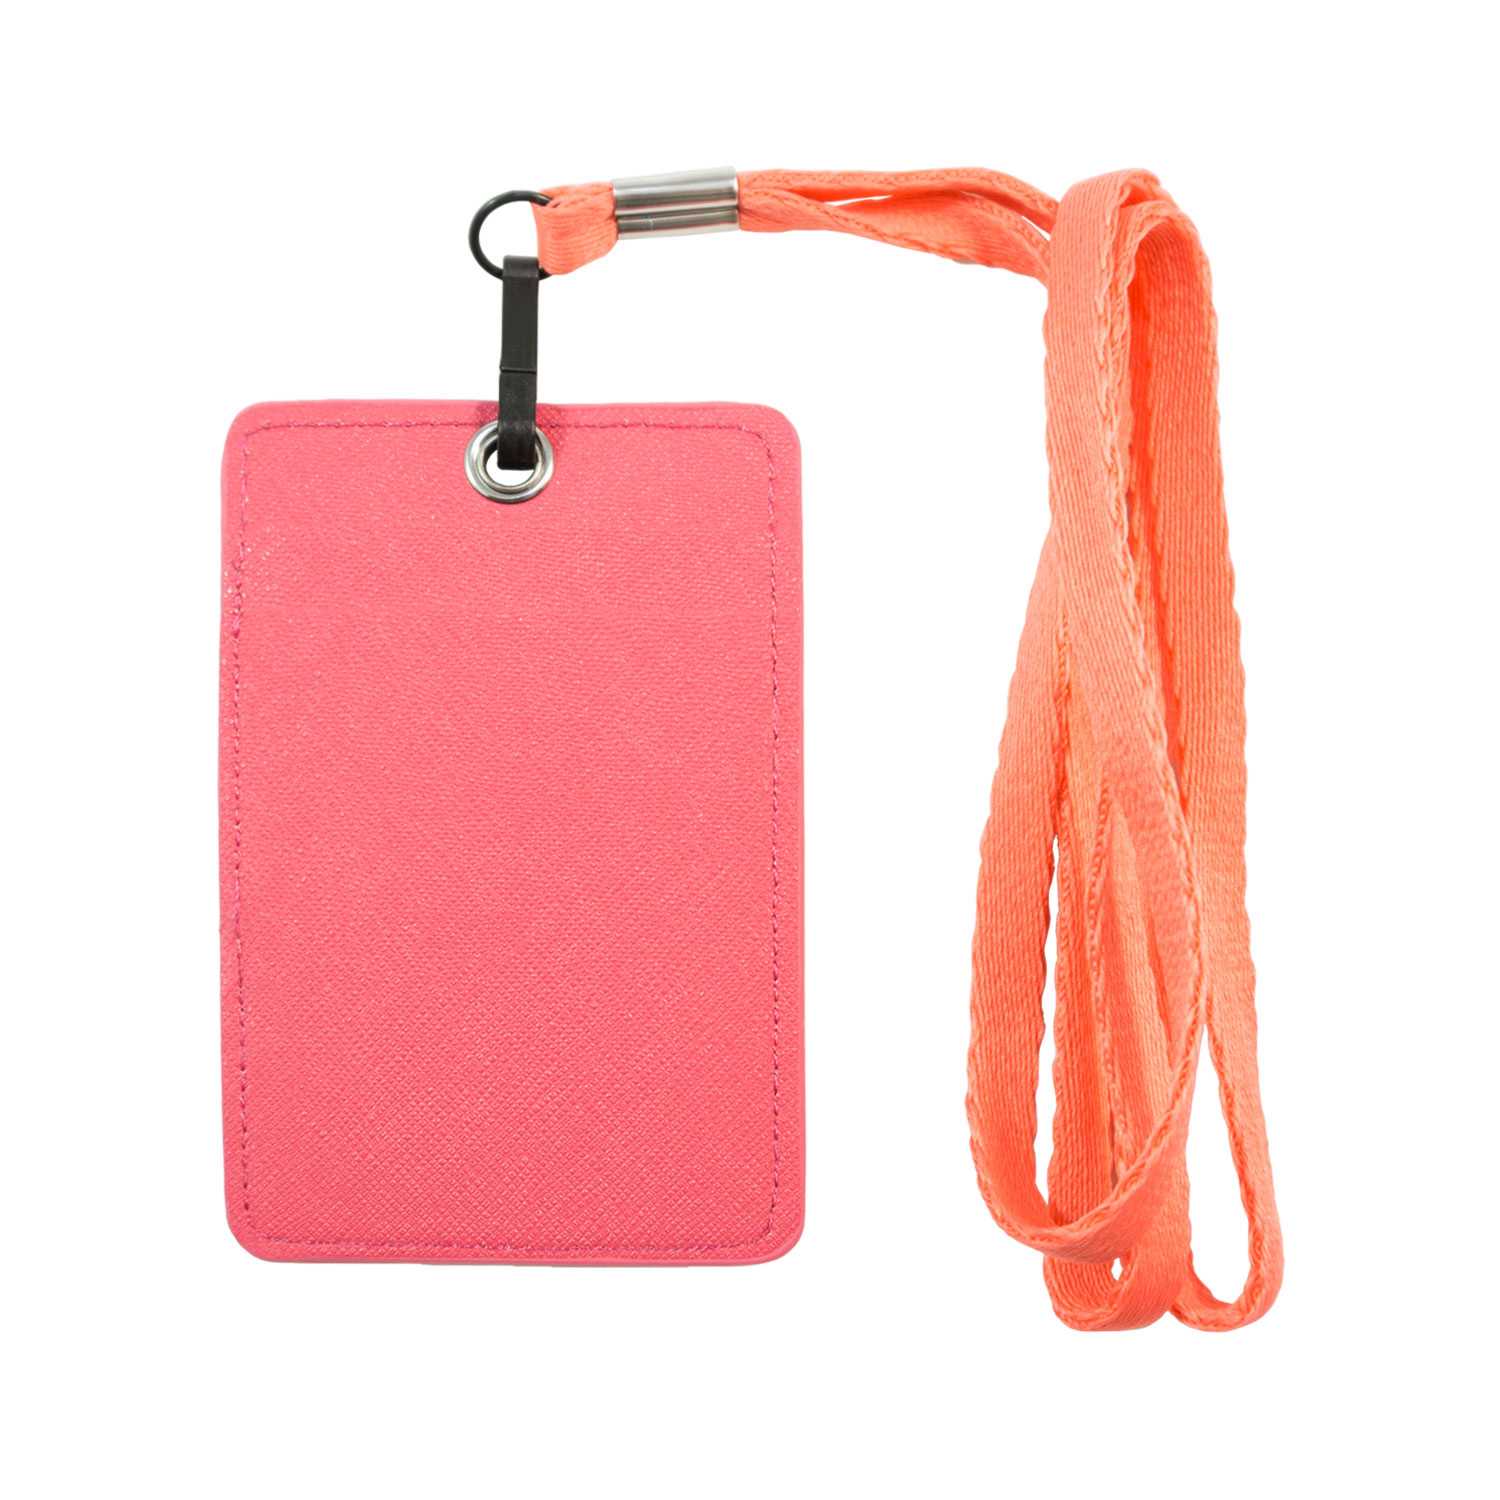 Unisex ID & Credit Cards Holder Wallet with Lanyard - Pink - Zestique